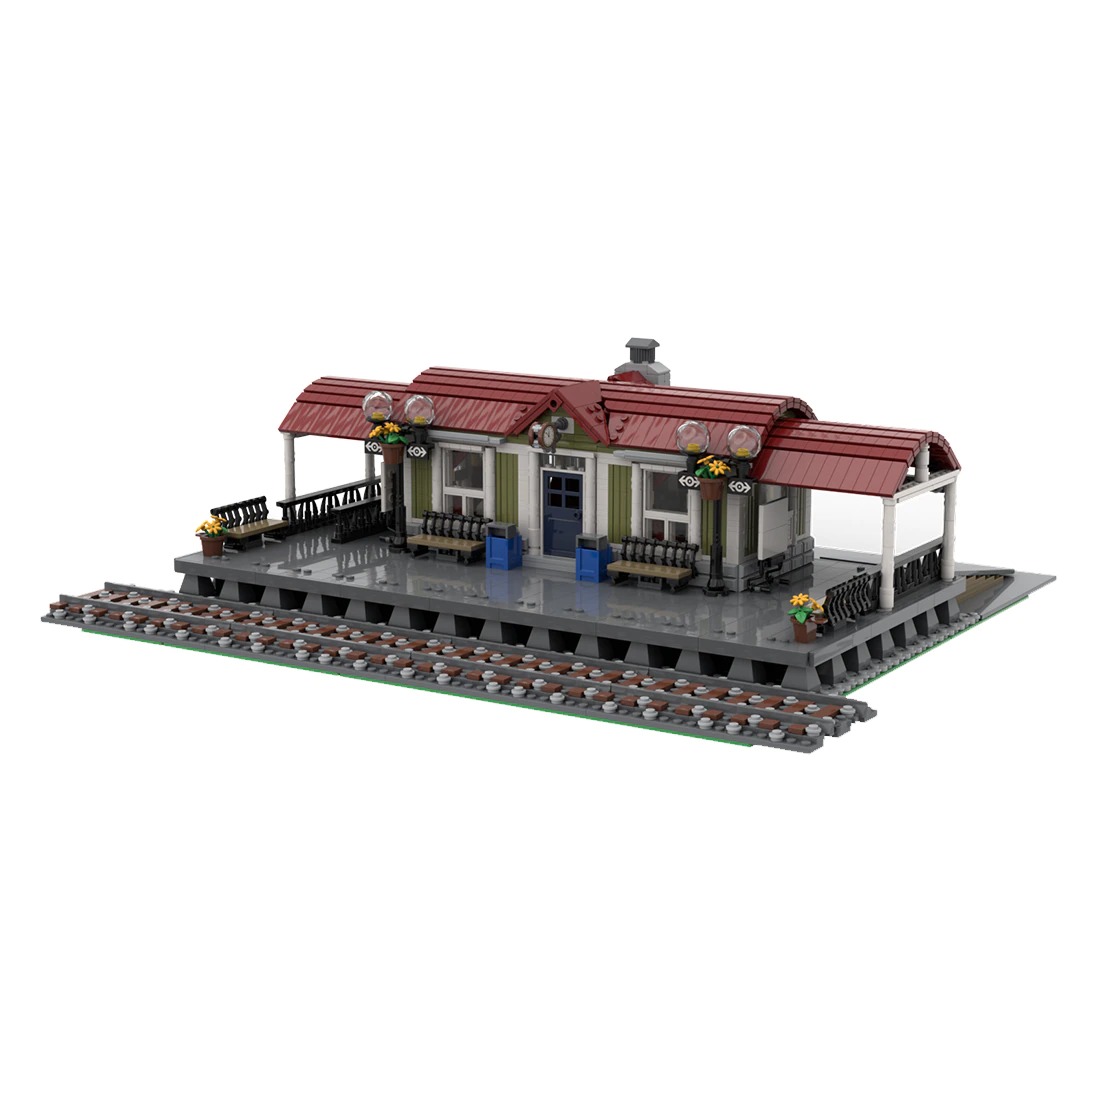 Curved Roof Train Station Moc 92280 5